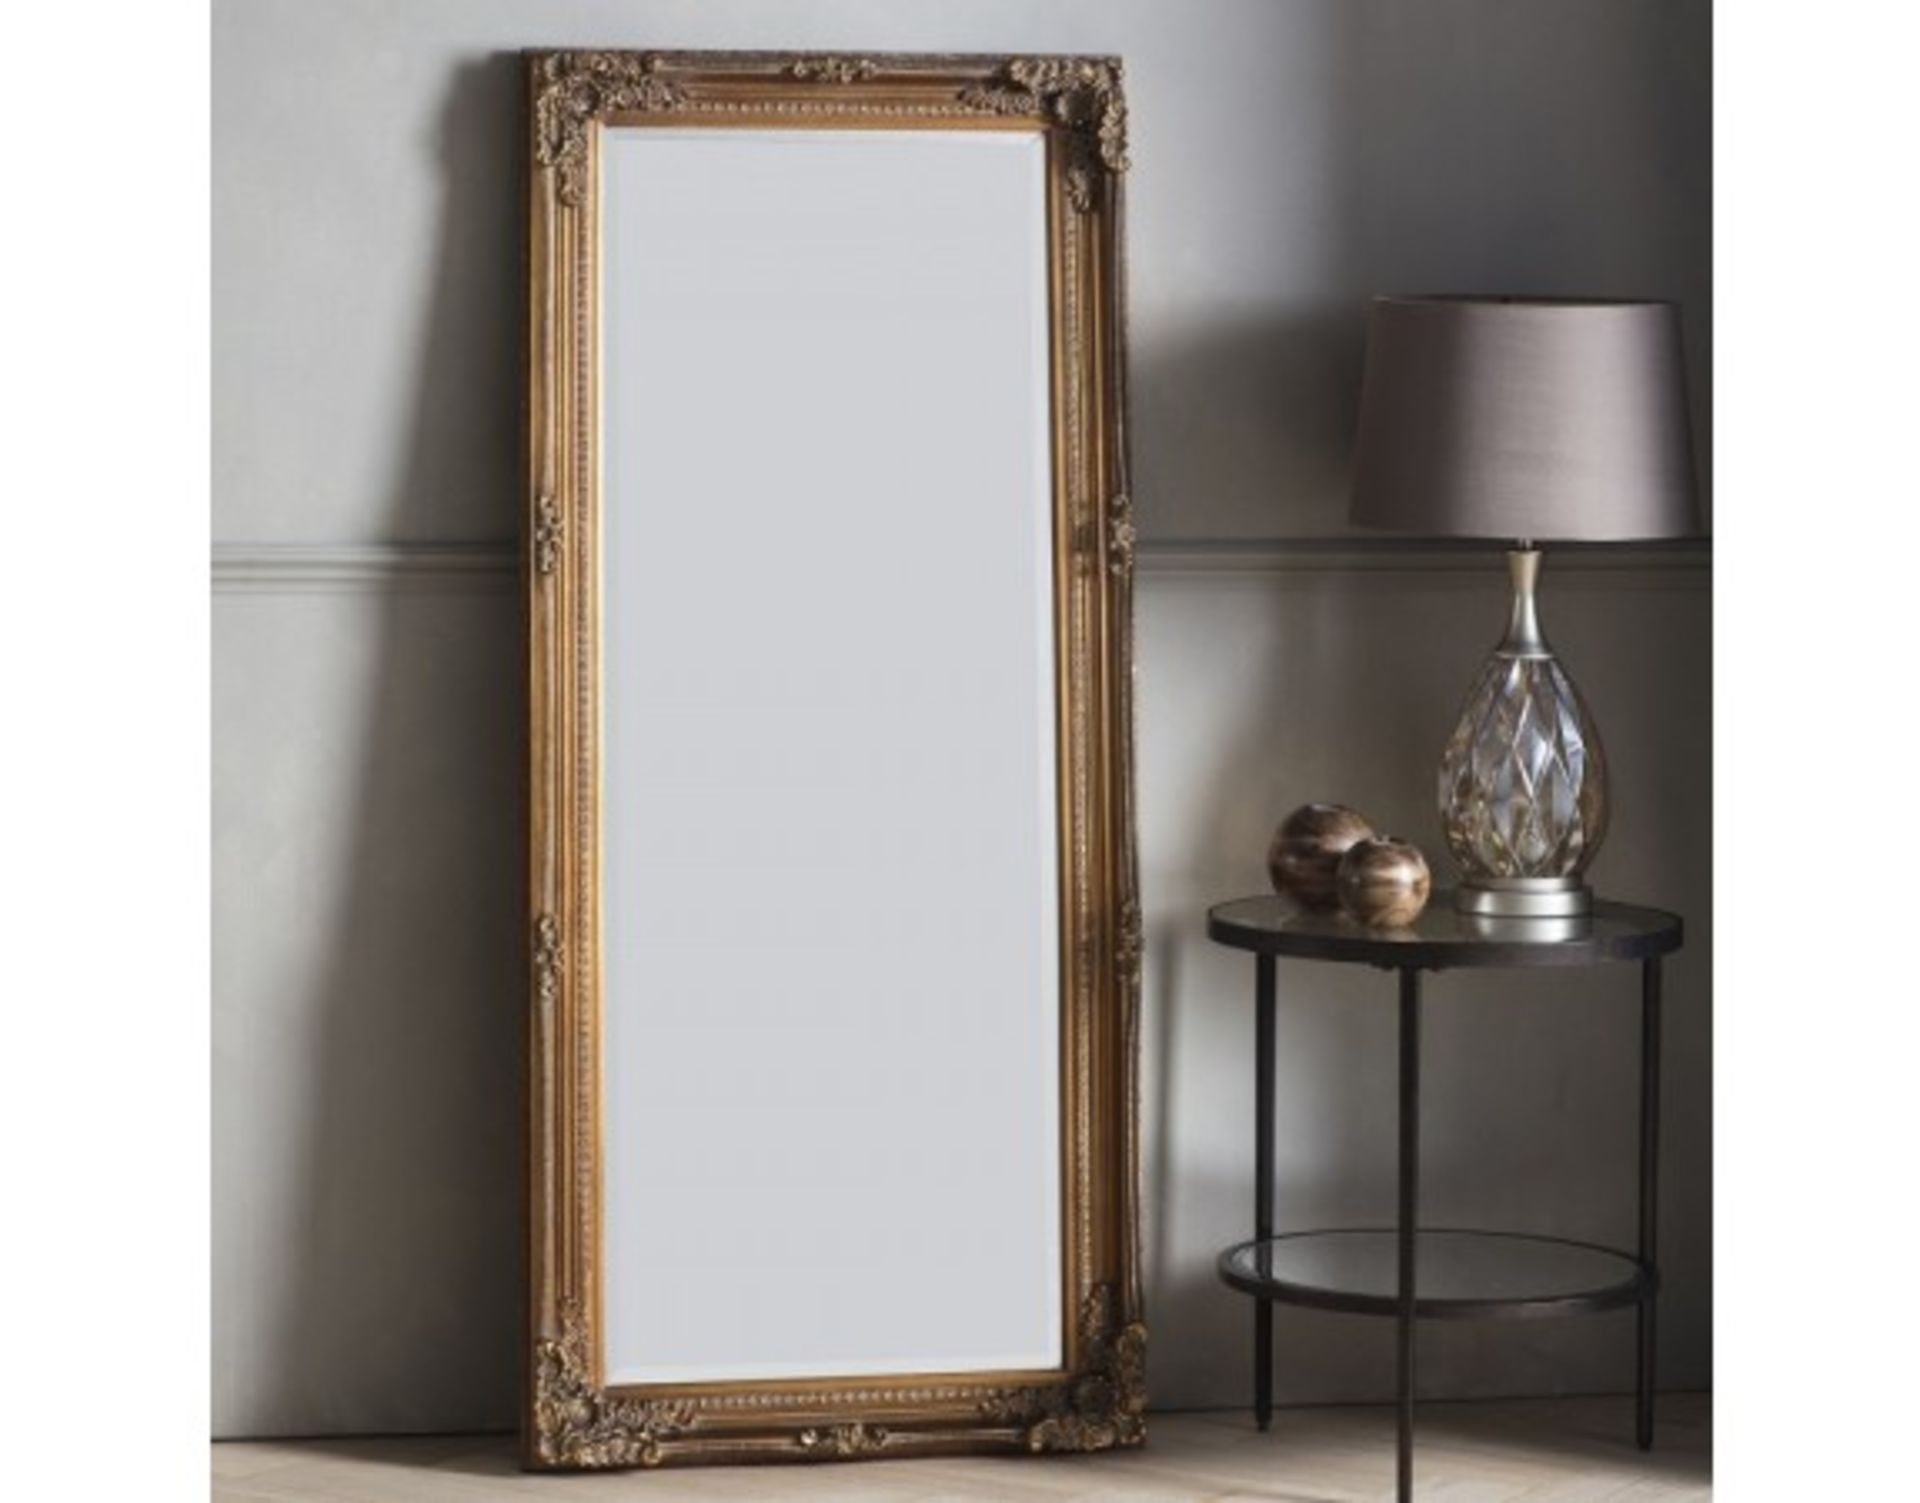 Rushden Bronze Rectangle Mirror 780 x 1080 mm An Ornate Baroque Inspired Wall Mirror In An Aged